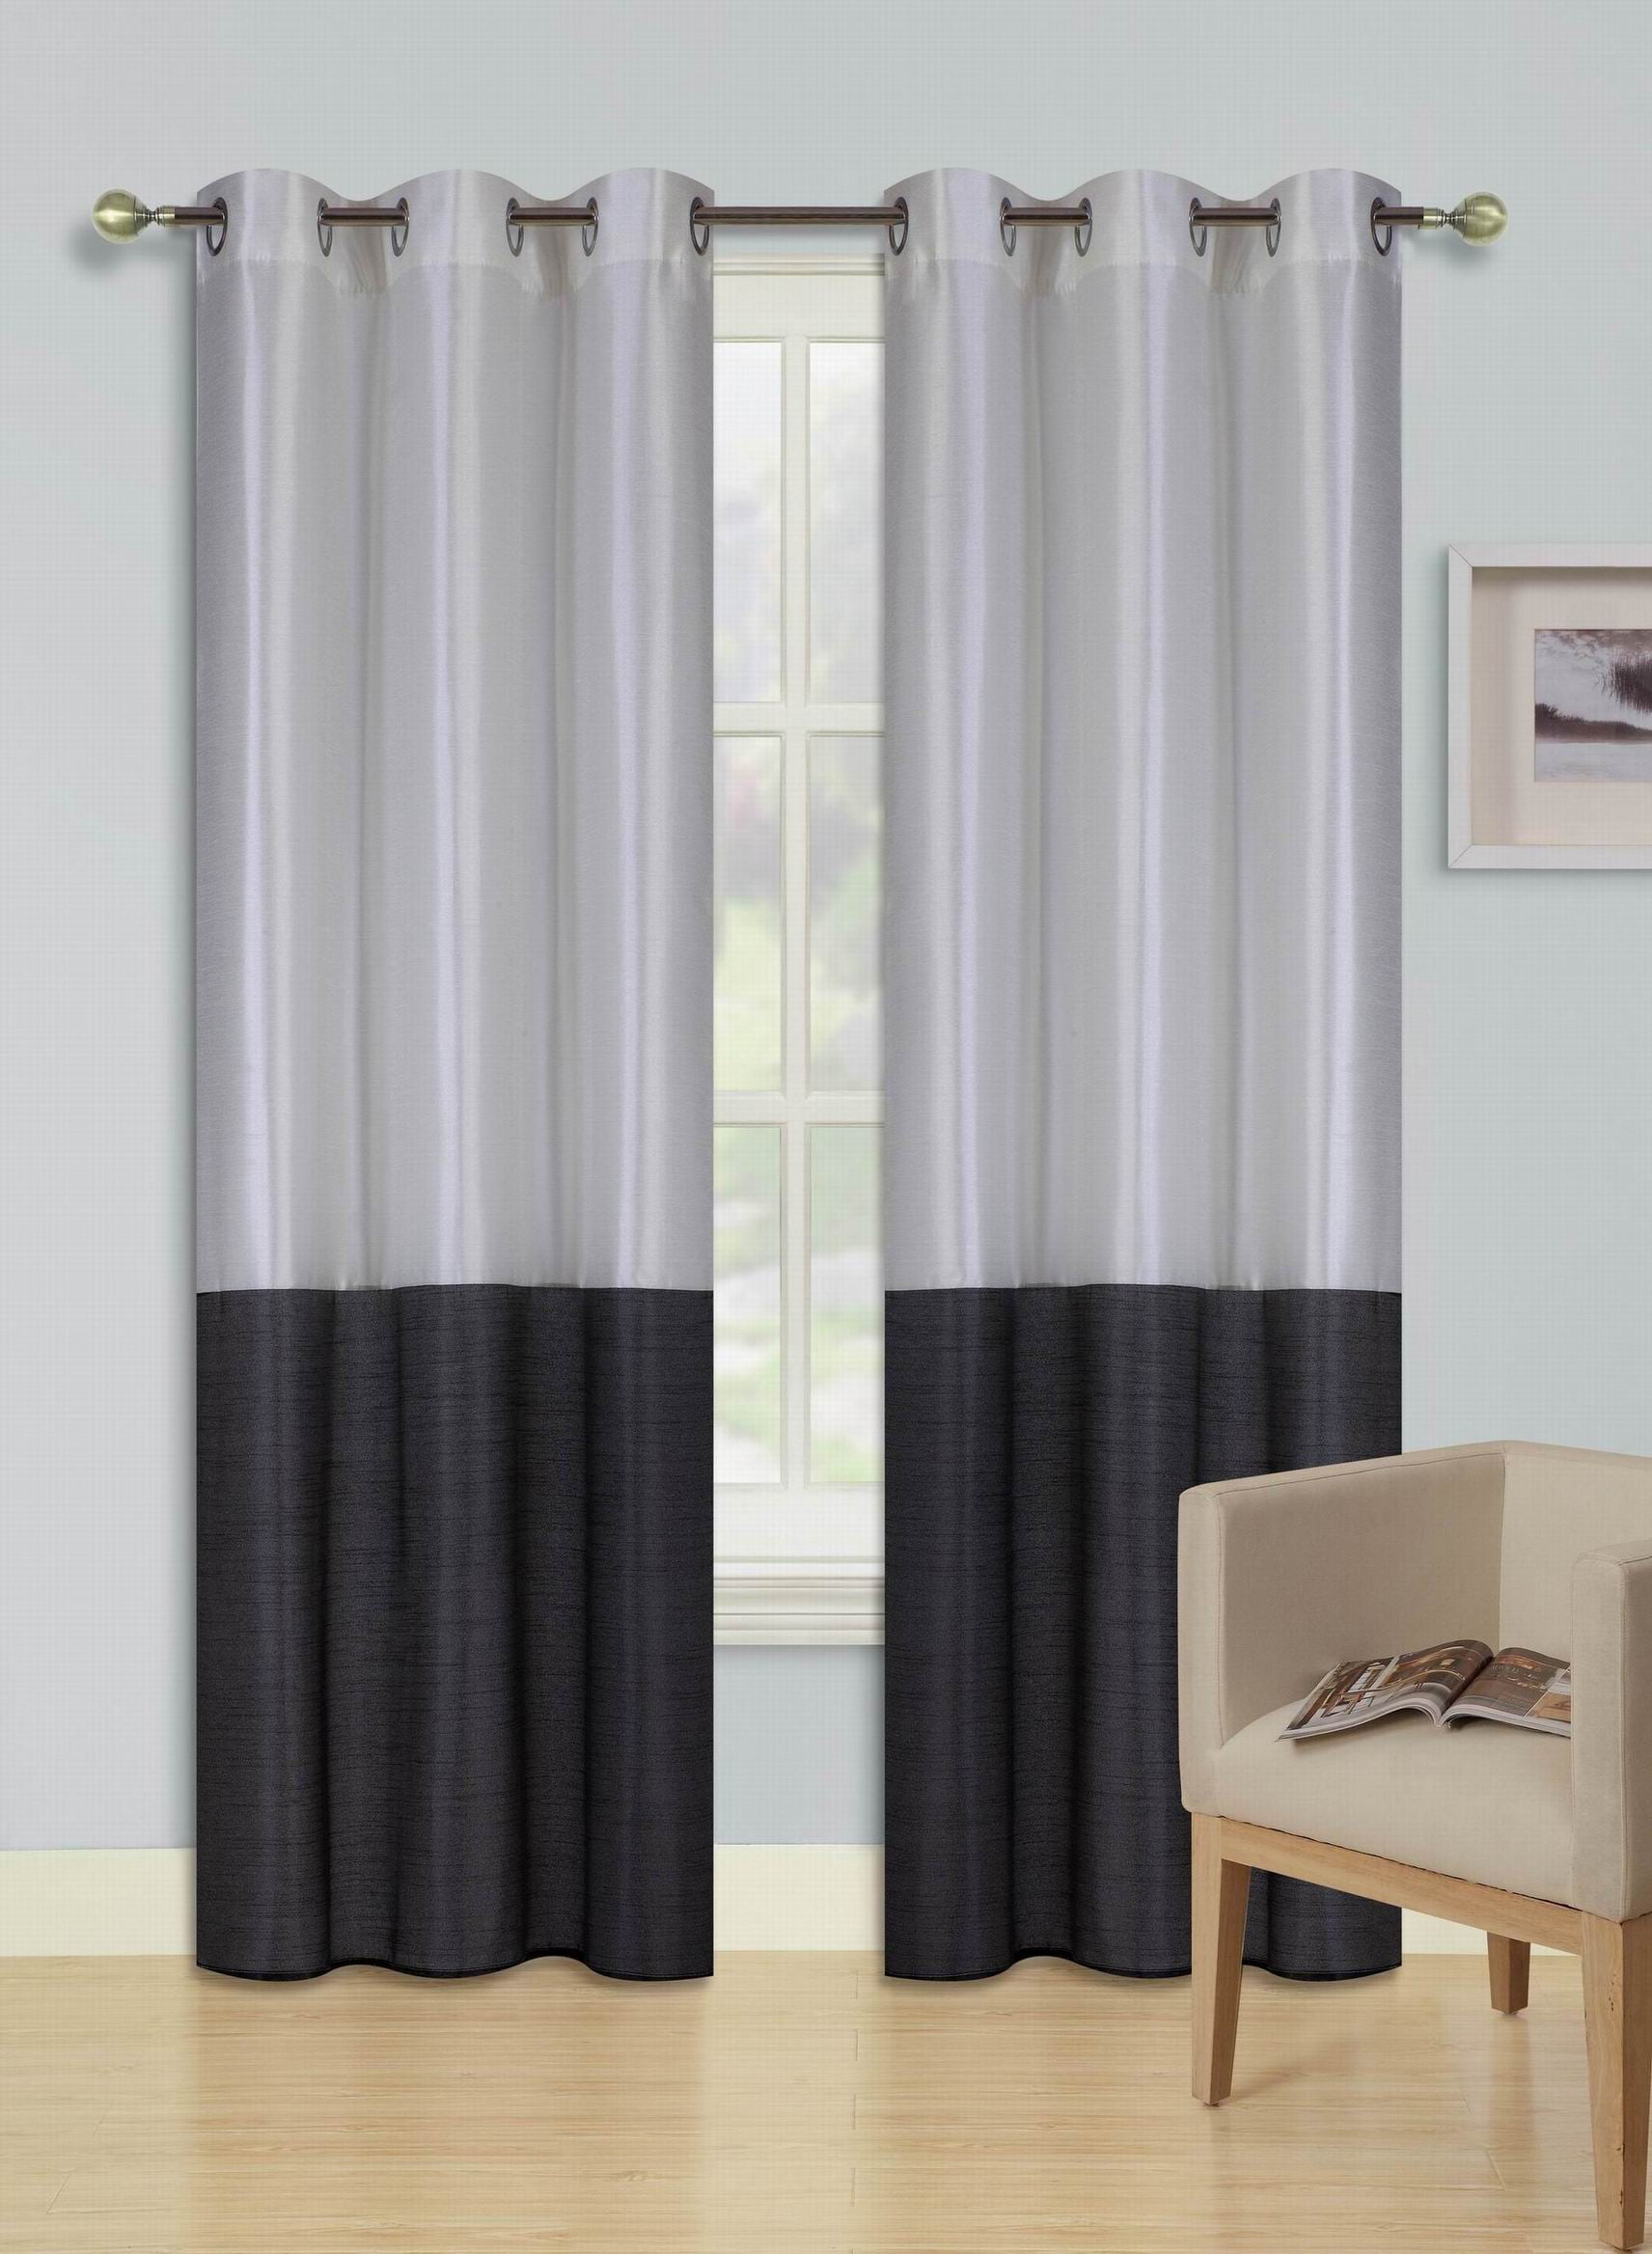 INSULATED FOAM LINED THERMAL BLACKOUT GROMMET WINDOW CURTAIN 1PC CHARCOAL GREY 